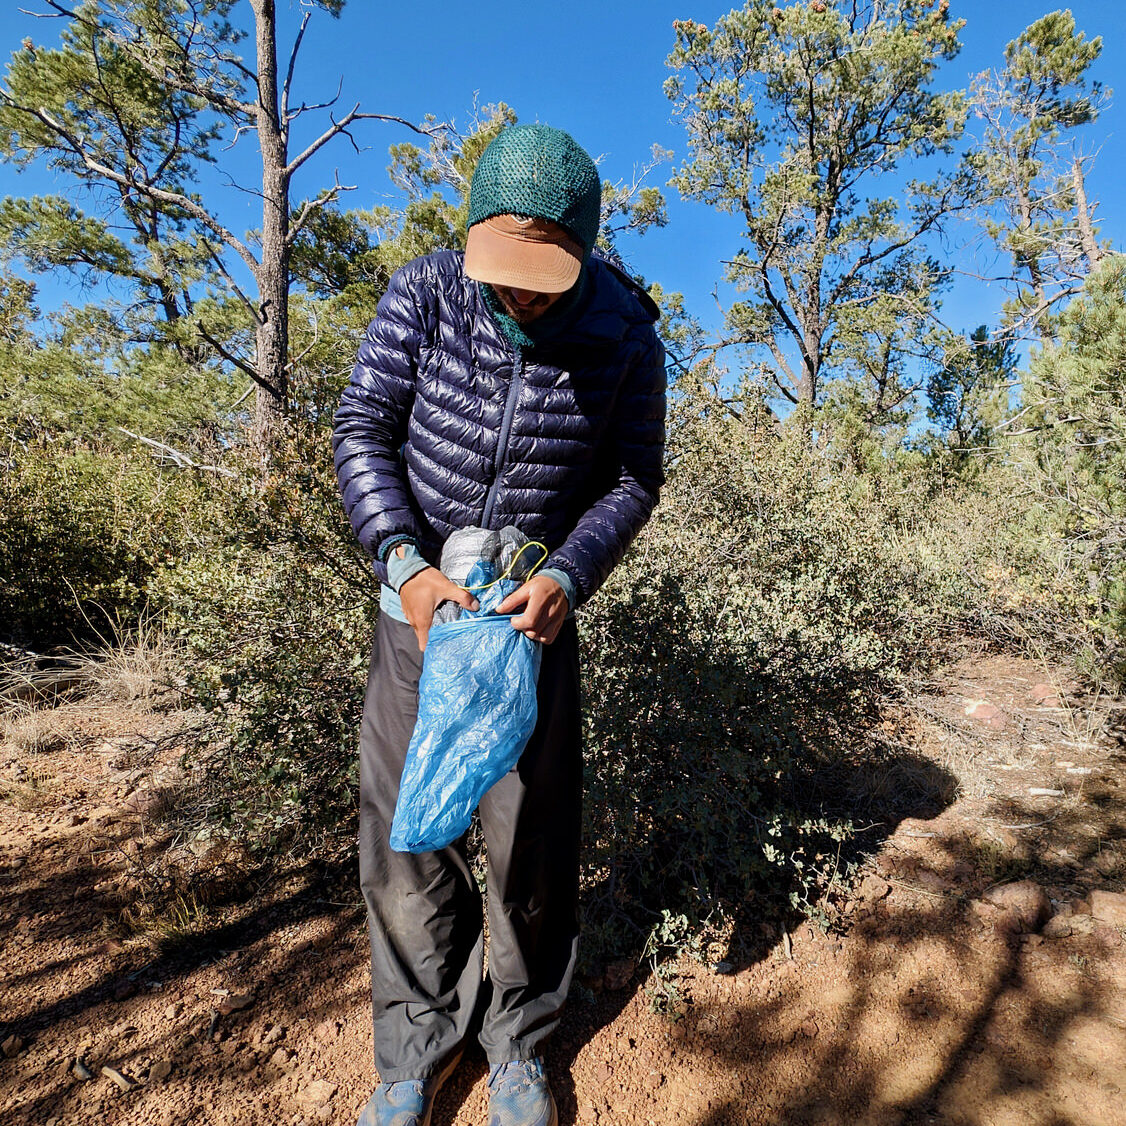 A hiker stuffing the Zpacks Duplex Zip tent into its stuff sack while out in nature